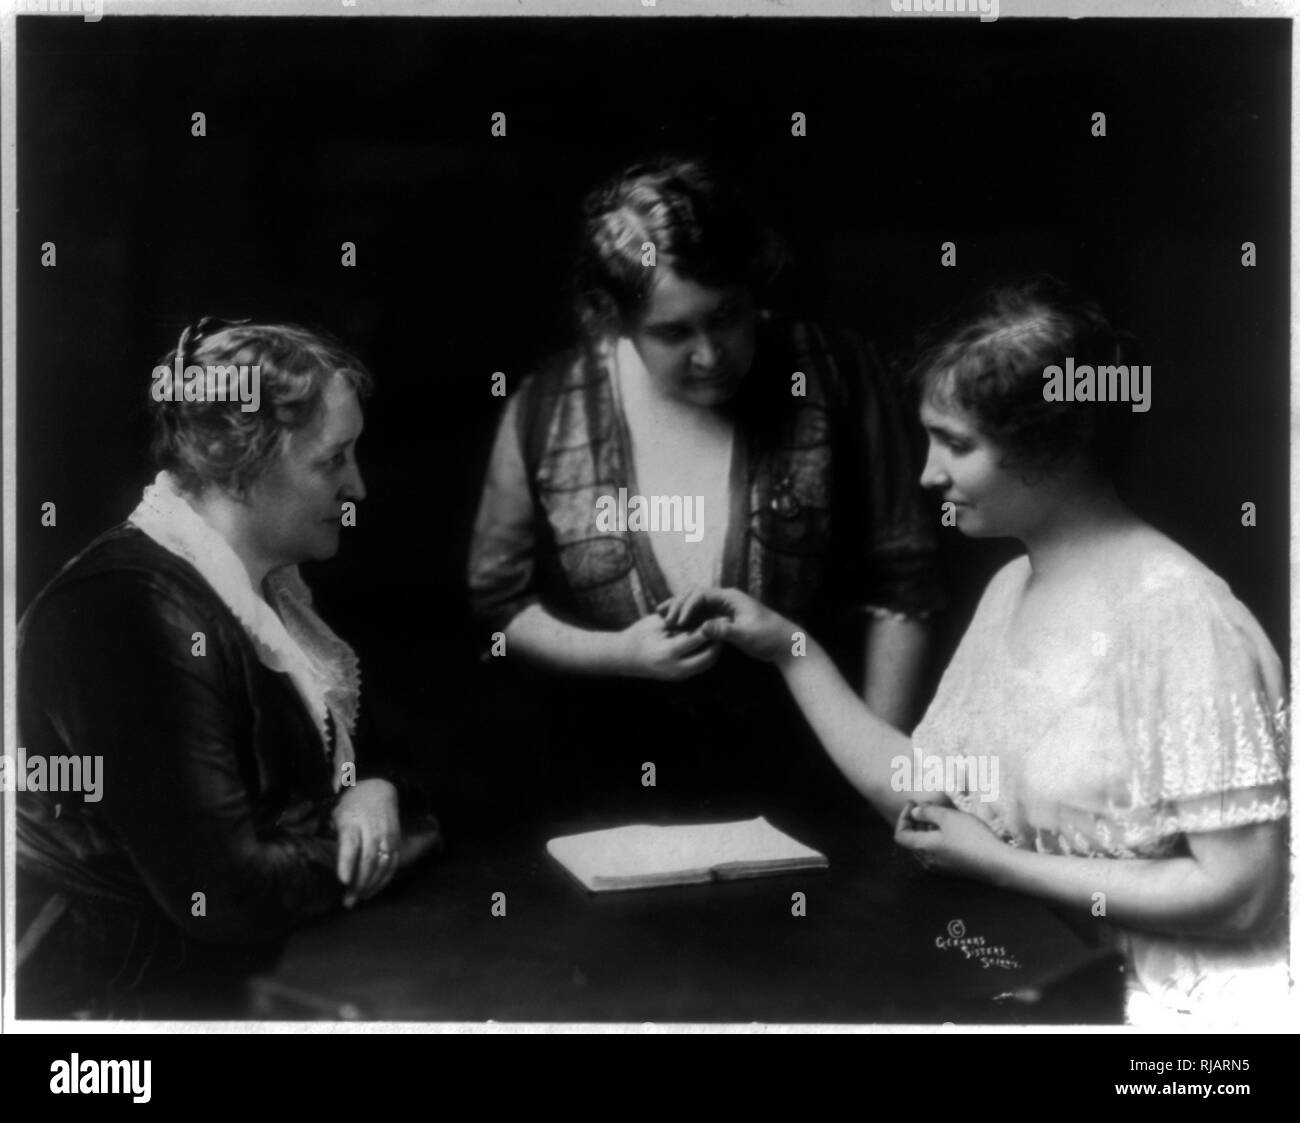 Helen Keller reading a woman's fingers as another woman watches1914  Helen Keller (1880 – 1968), American author, political activist, and lecturer. She was the first deaf-blind person to earn a bachelor of arts degree. she campaigned for women's suffrage, labour rights, socialism, antimilitarism, and other similar causes. Stock Photo